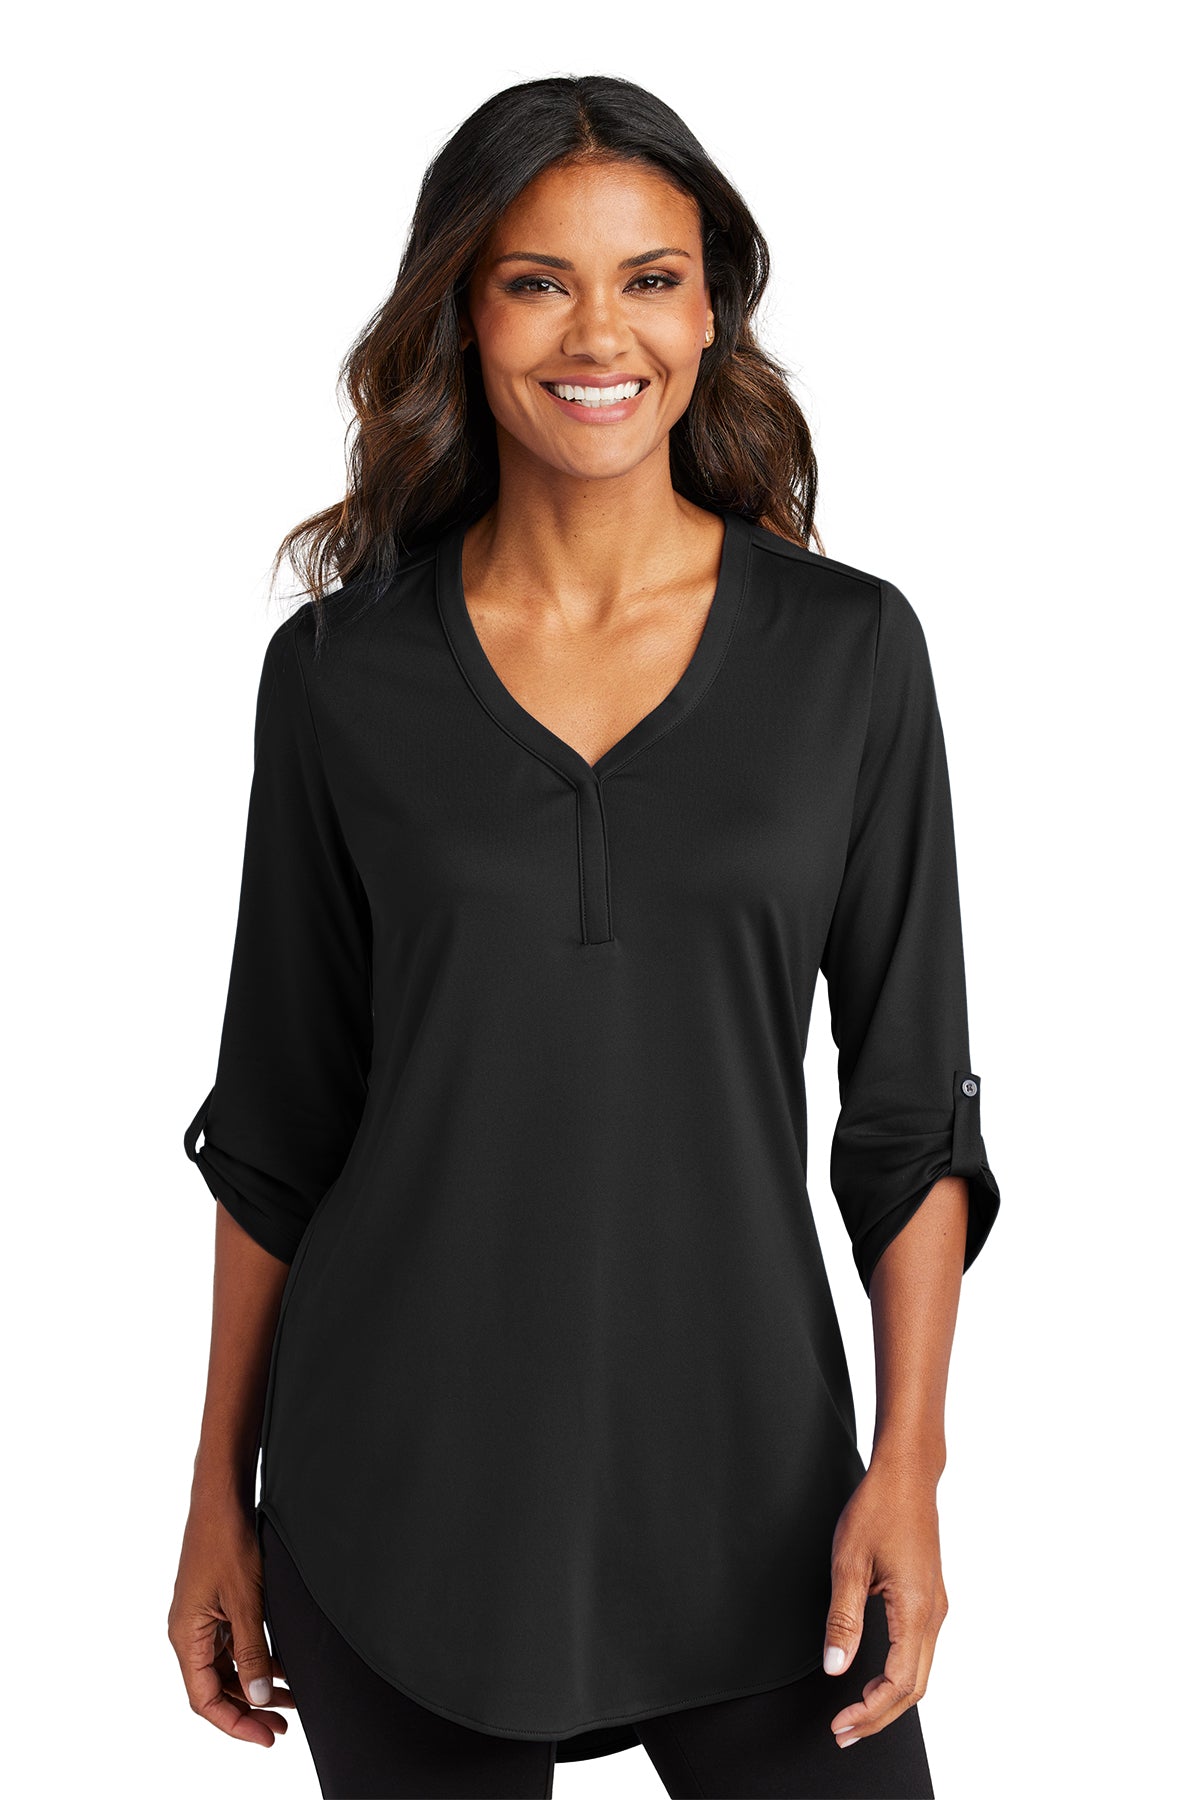 Thea City Stretch 3/4 Sleeve Tunic - Black (Ships in 1-2 Weeks)